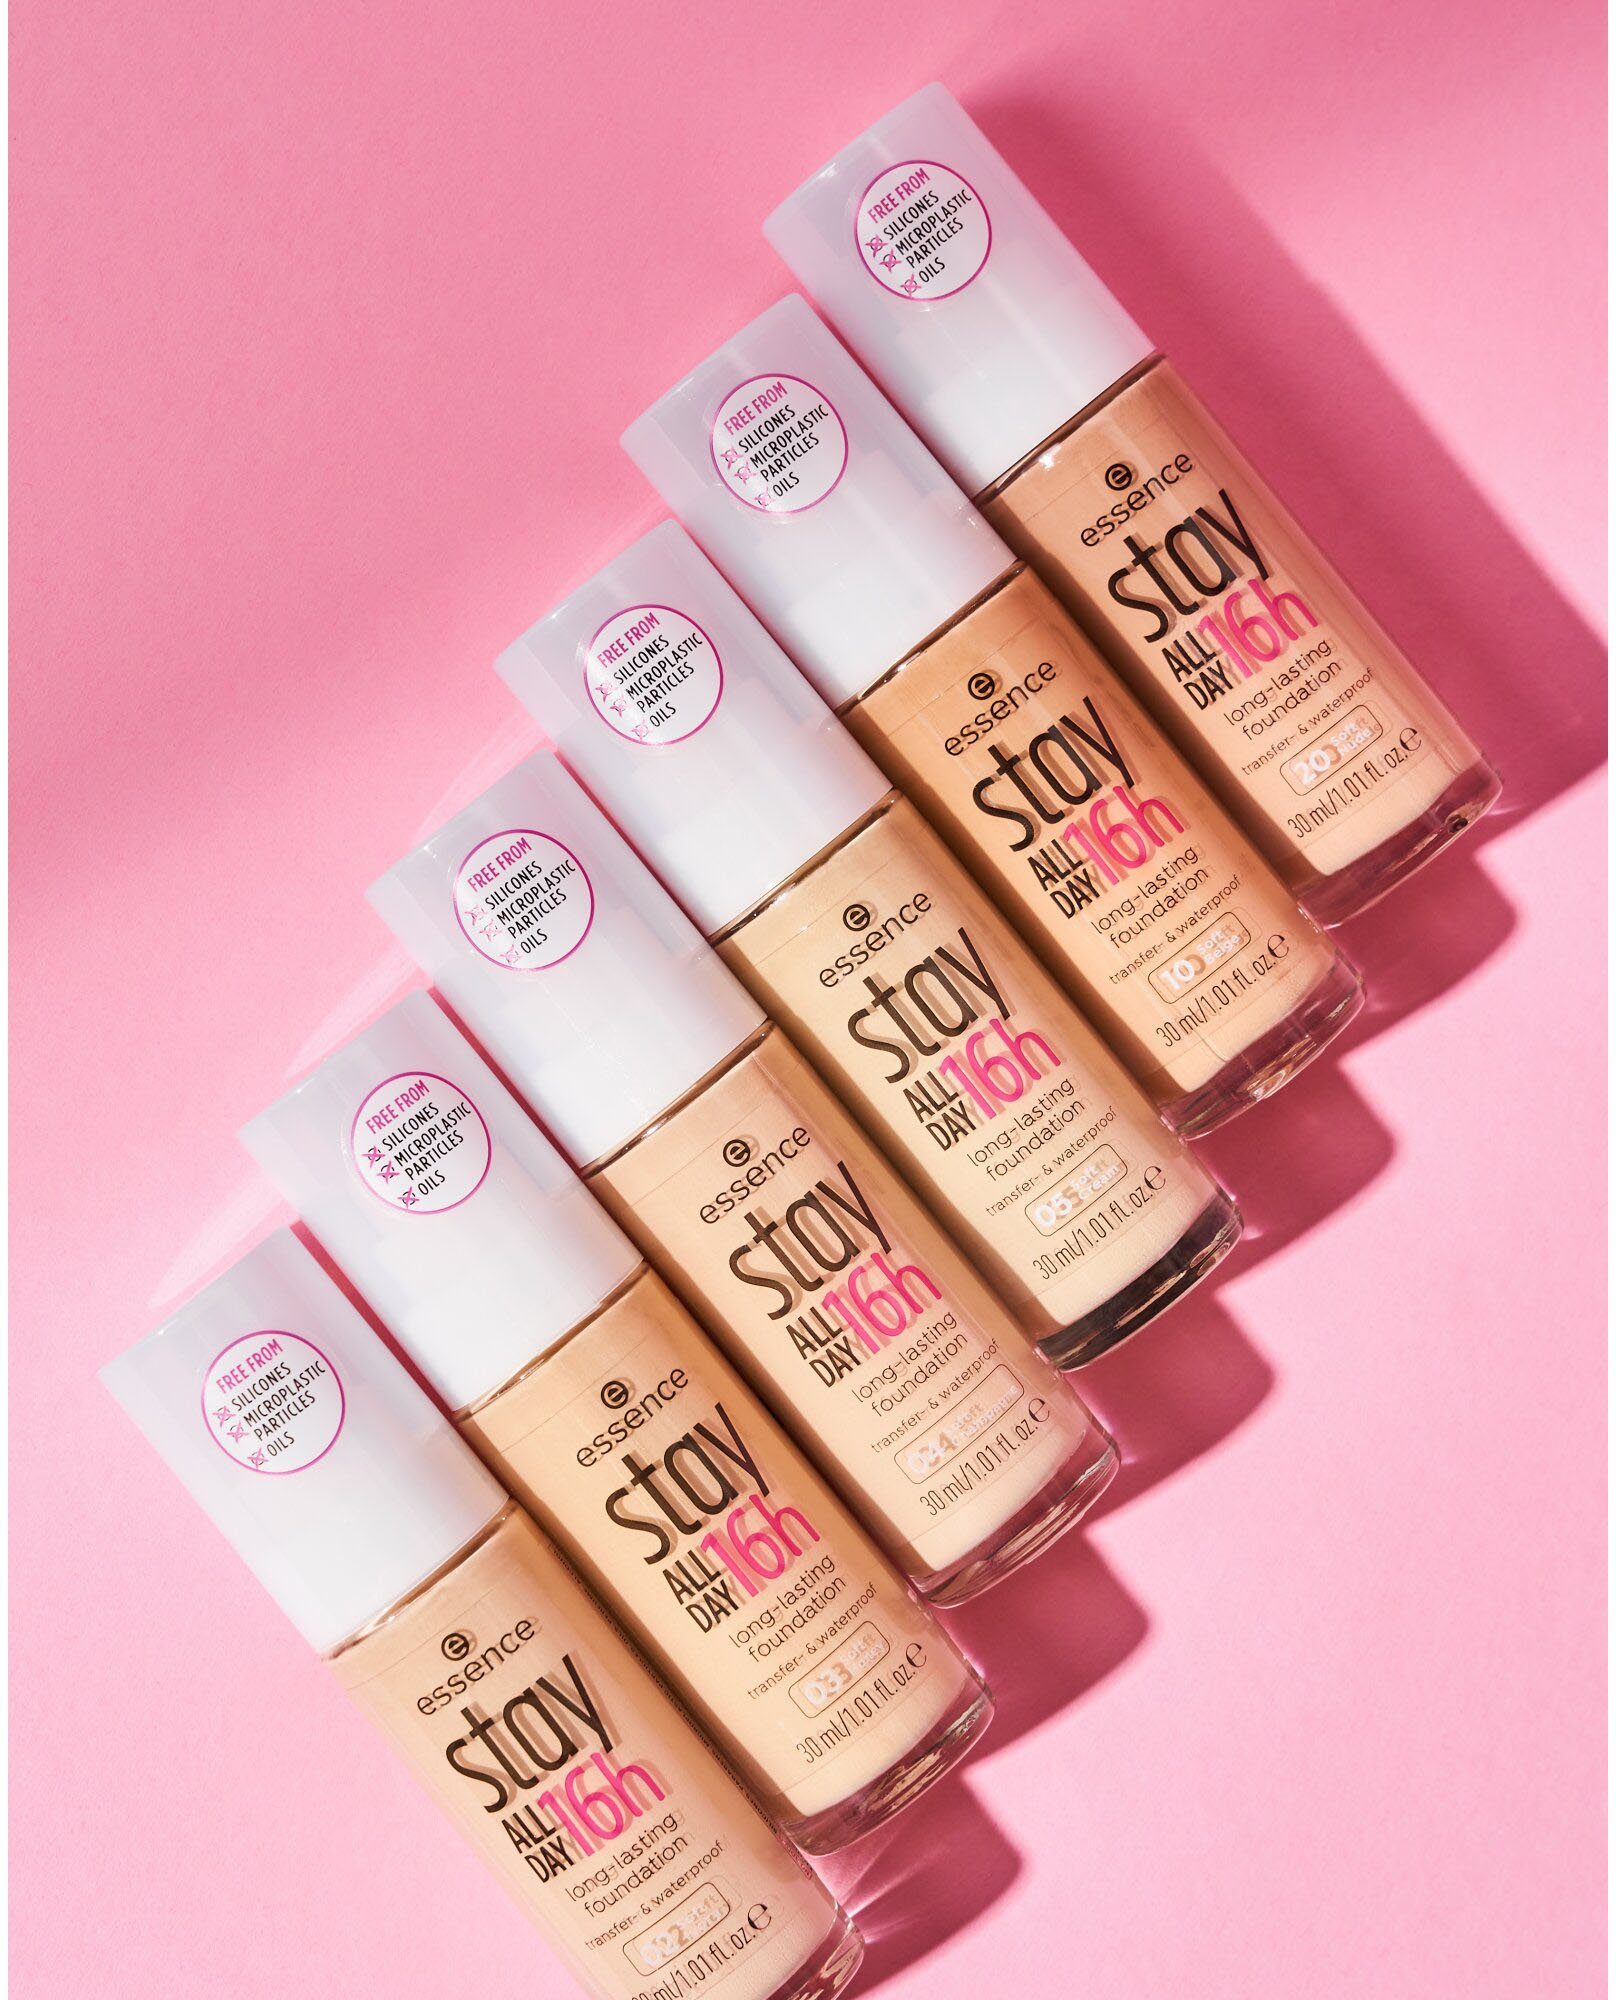 Essence Foundation stay ALL DAY long-lasting, Soft Sand 16h 3-tlg